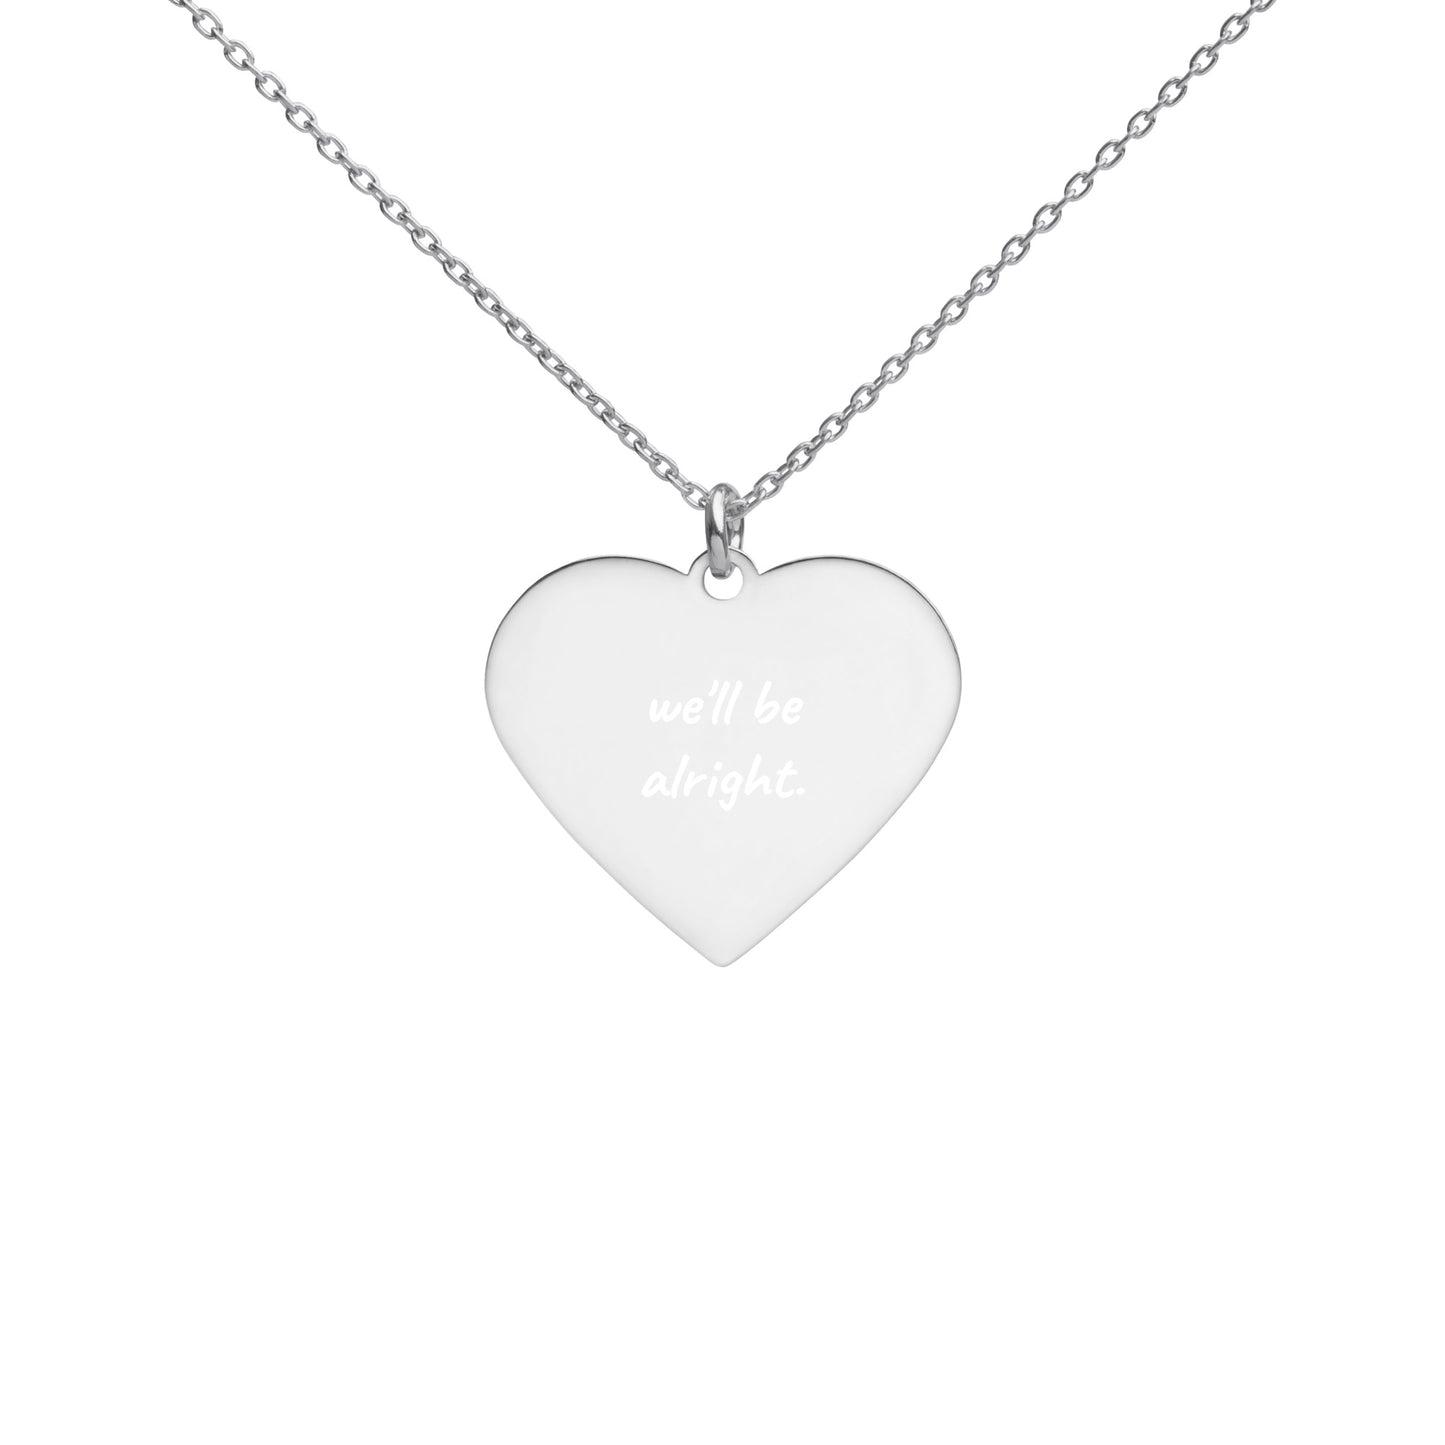 We'll Be Alright Necklace